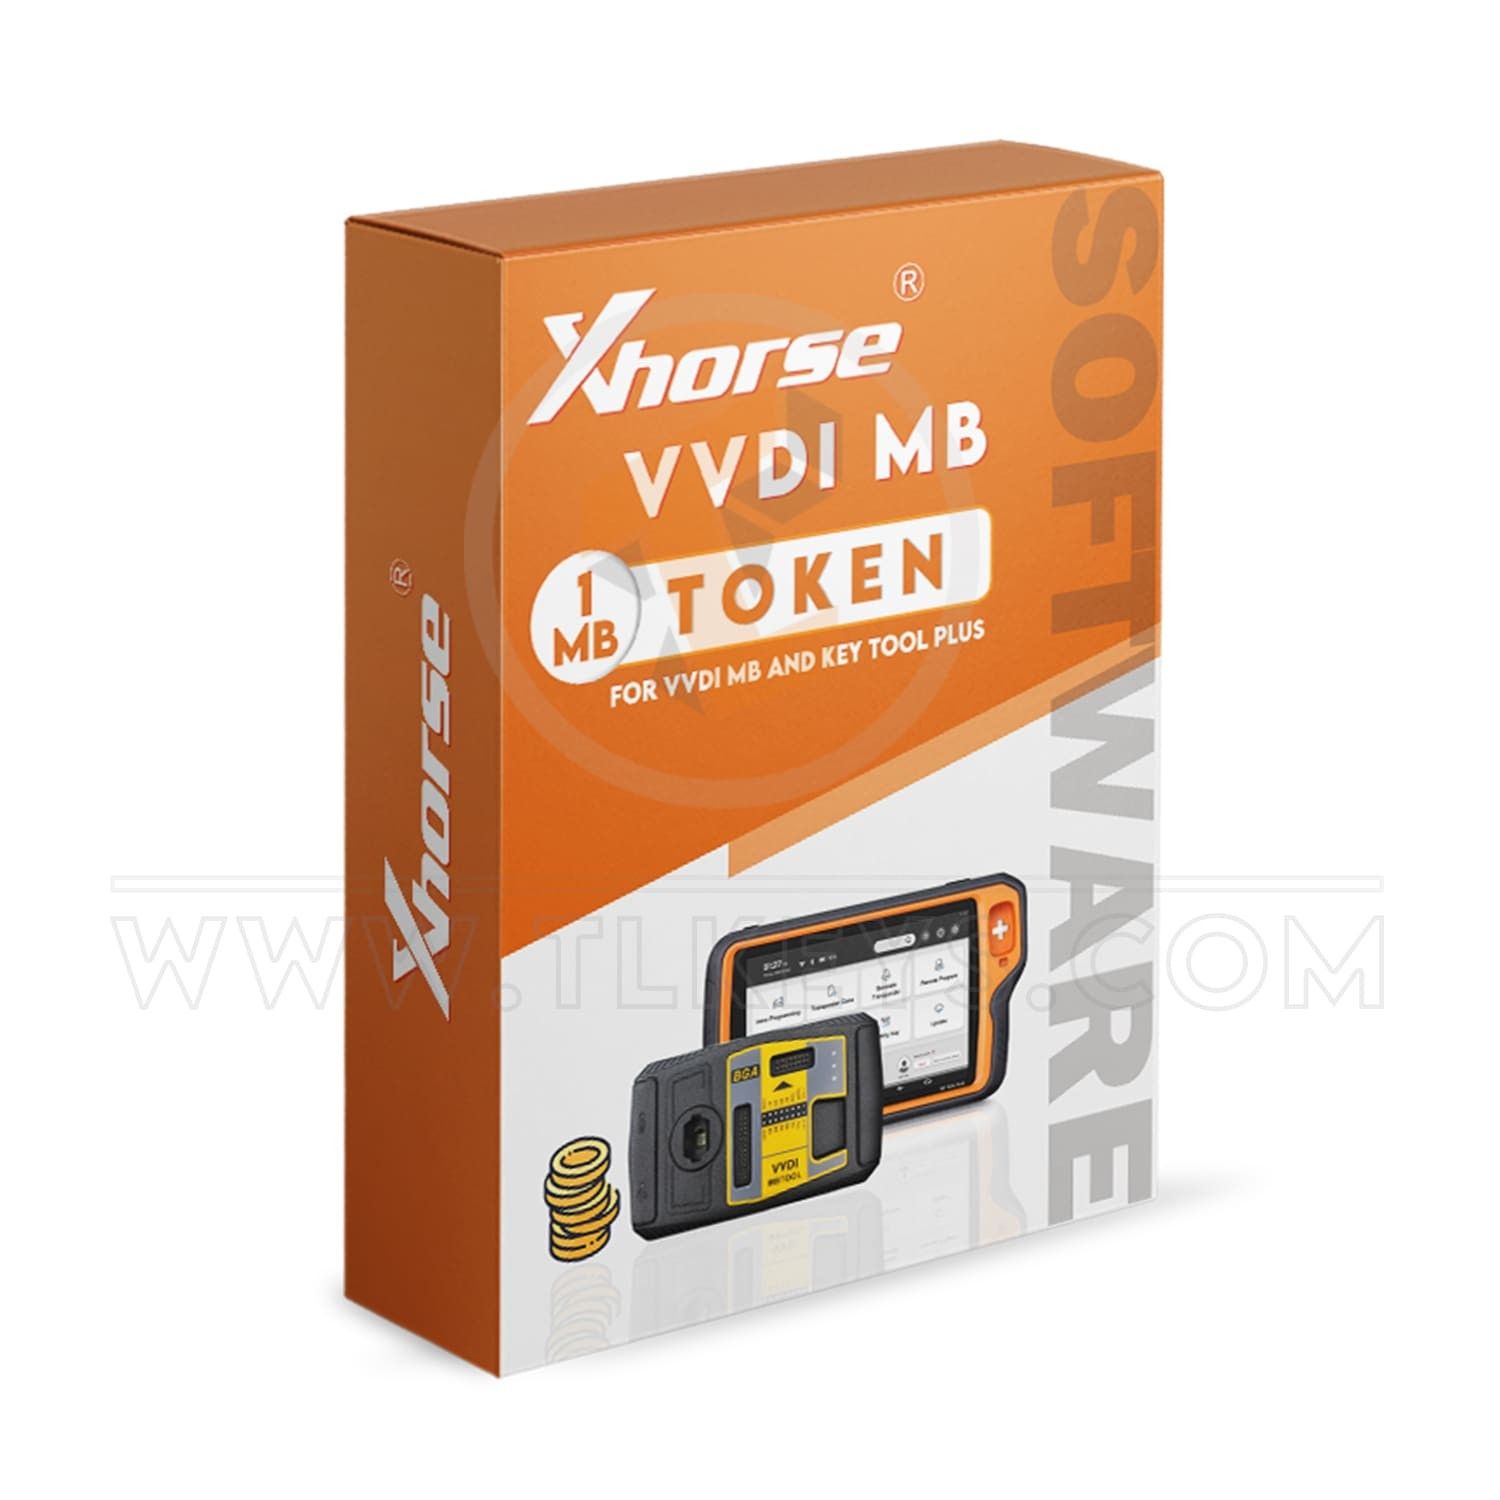 Xhorse 1 MB Token For VVDI MB And Key Tool Plus token